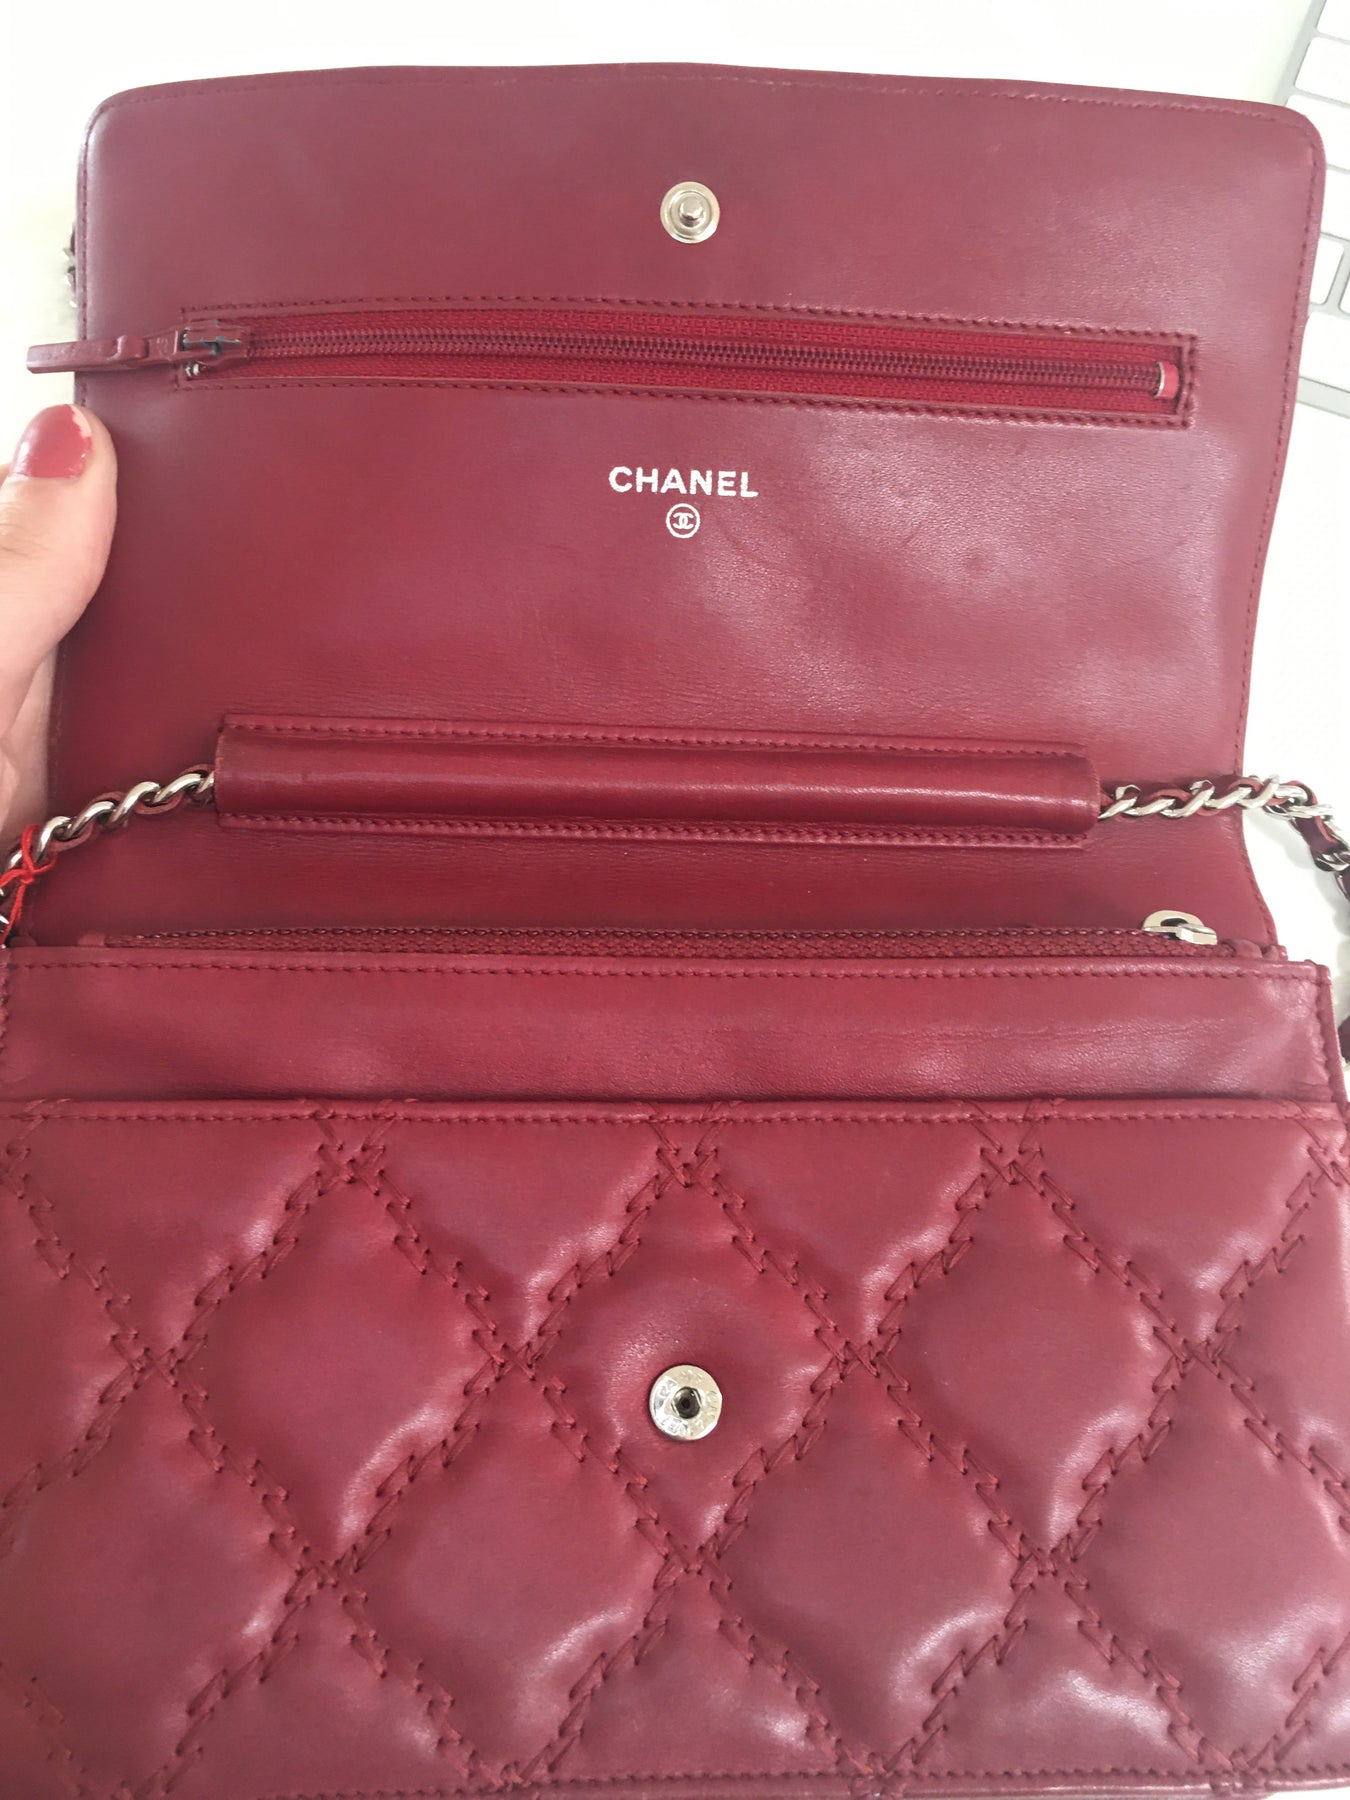 Chanel WOC Pink Patent Leather